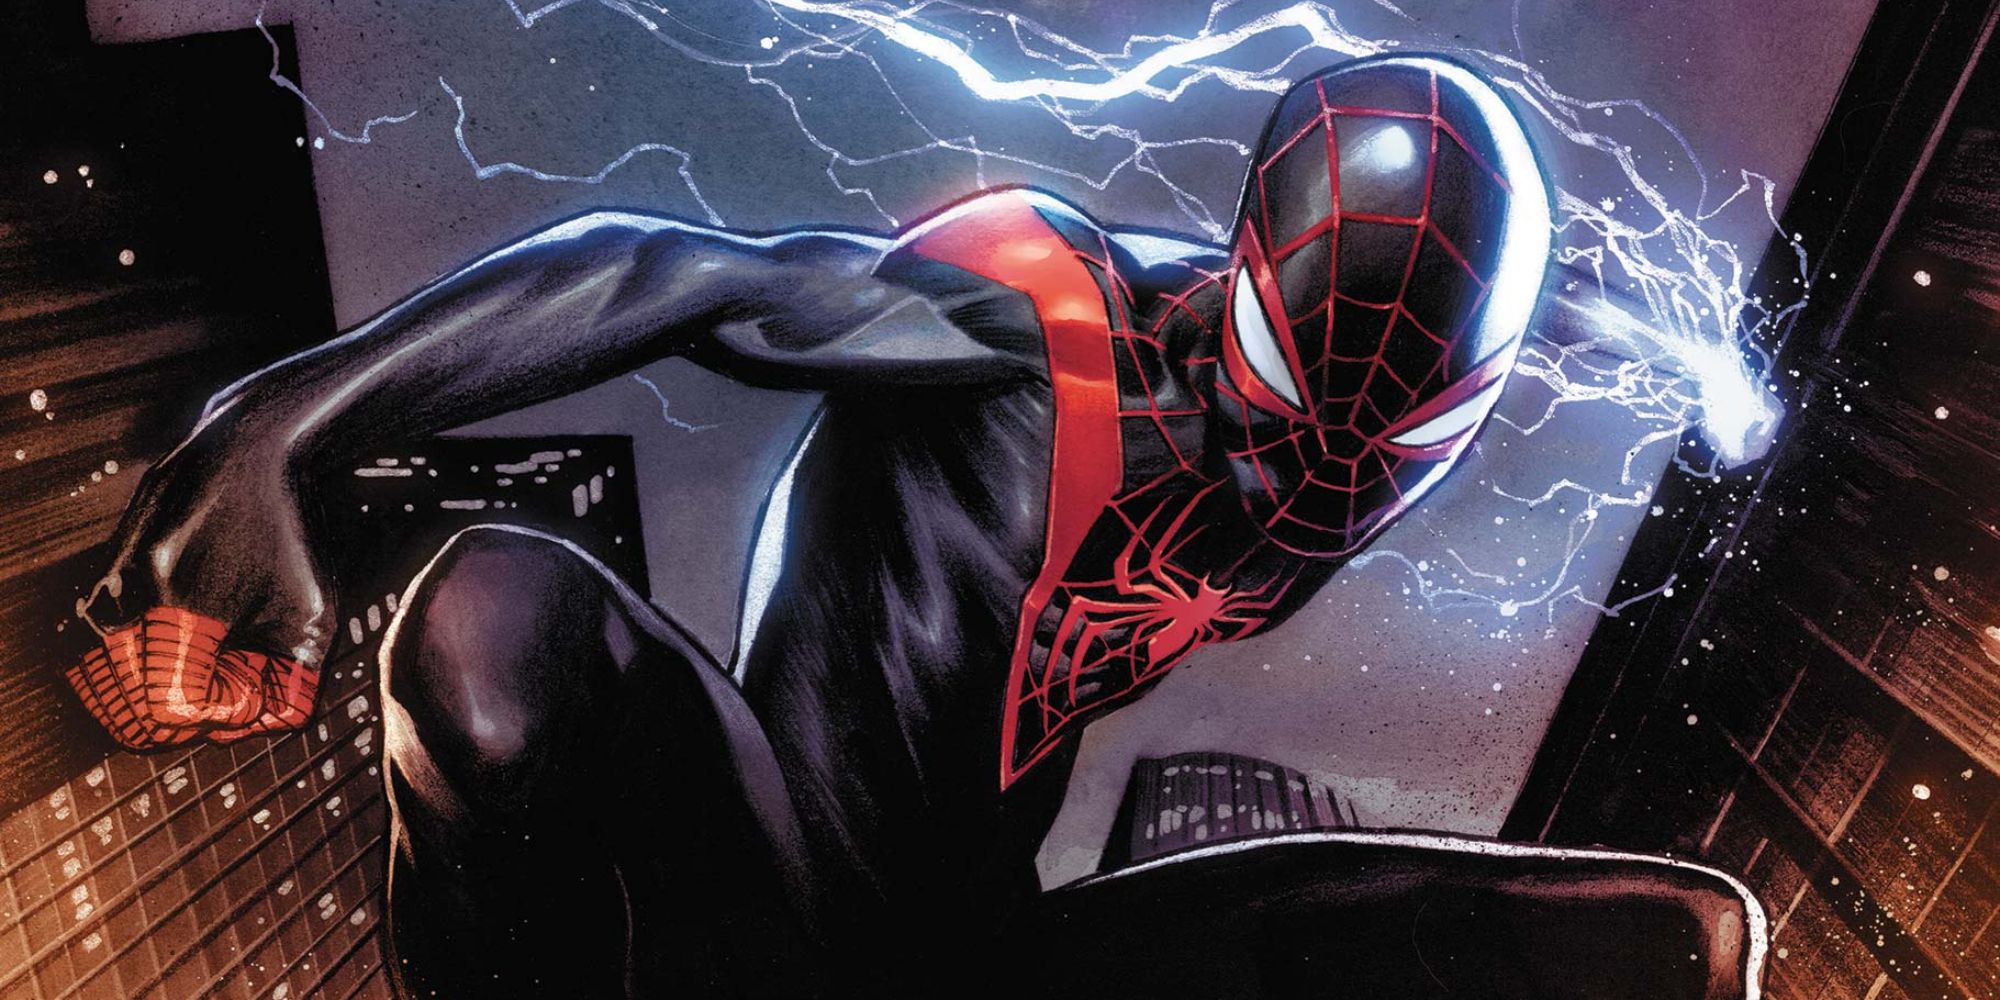 Miles Morales in his black-and-red costume summoning lightning in the comics